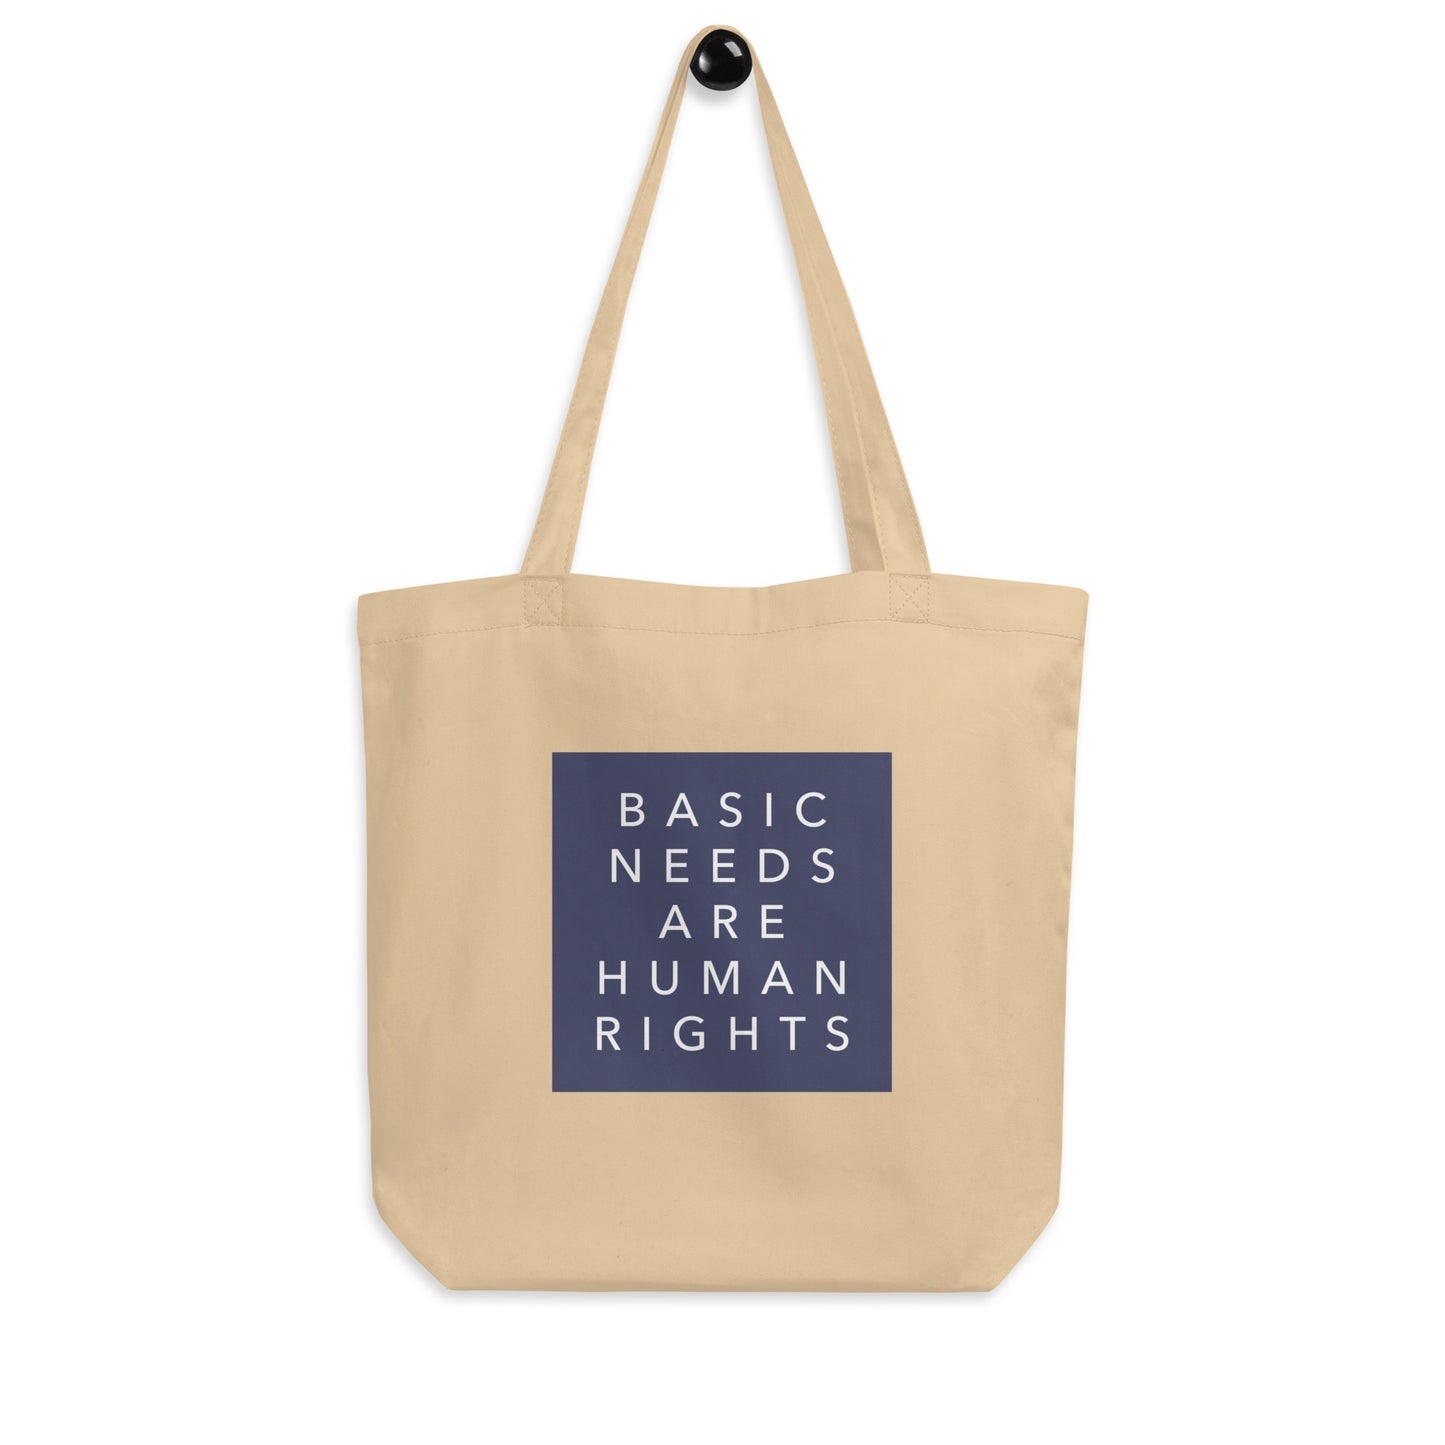 Basic Needs are Human Rights - Eco Tote Bag